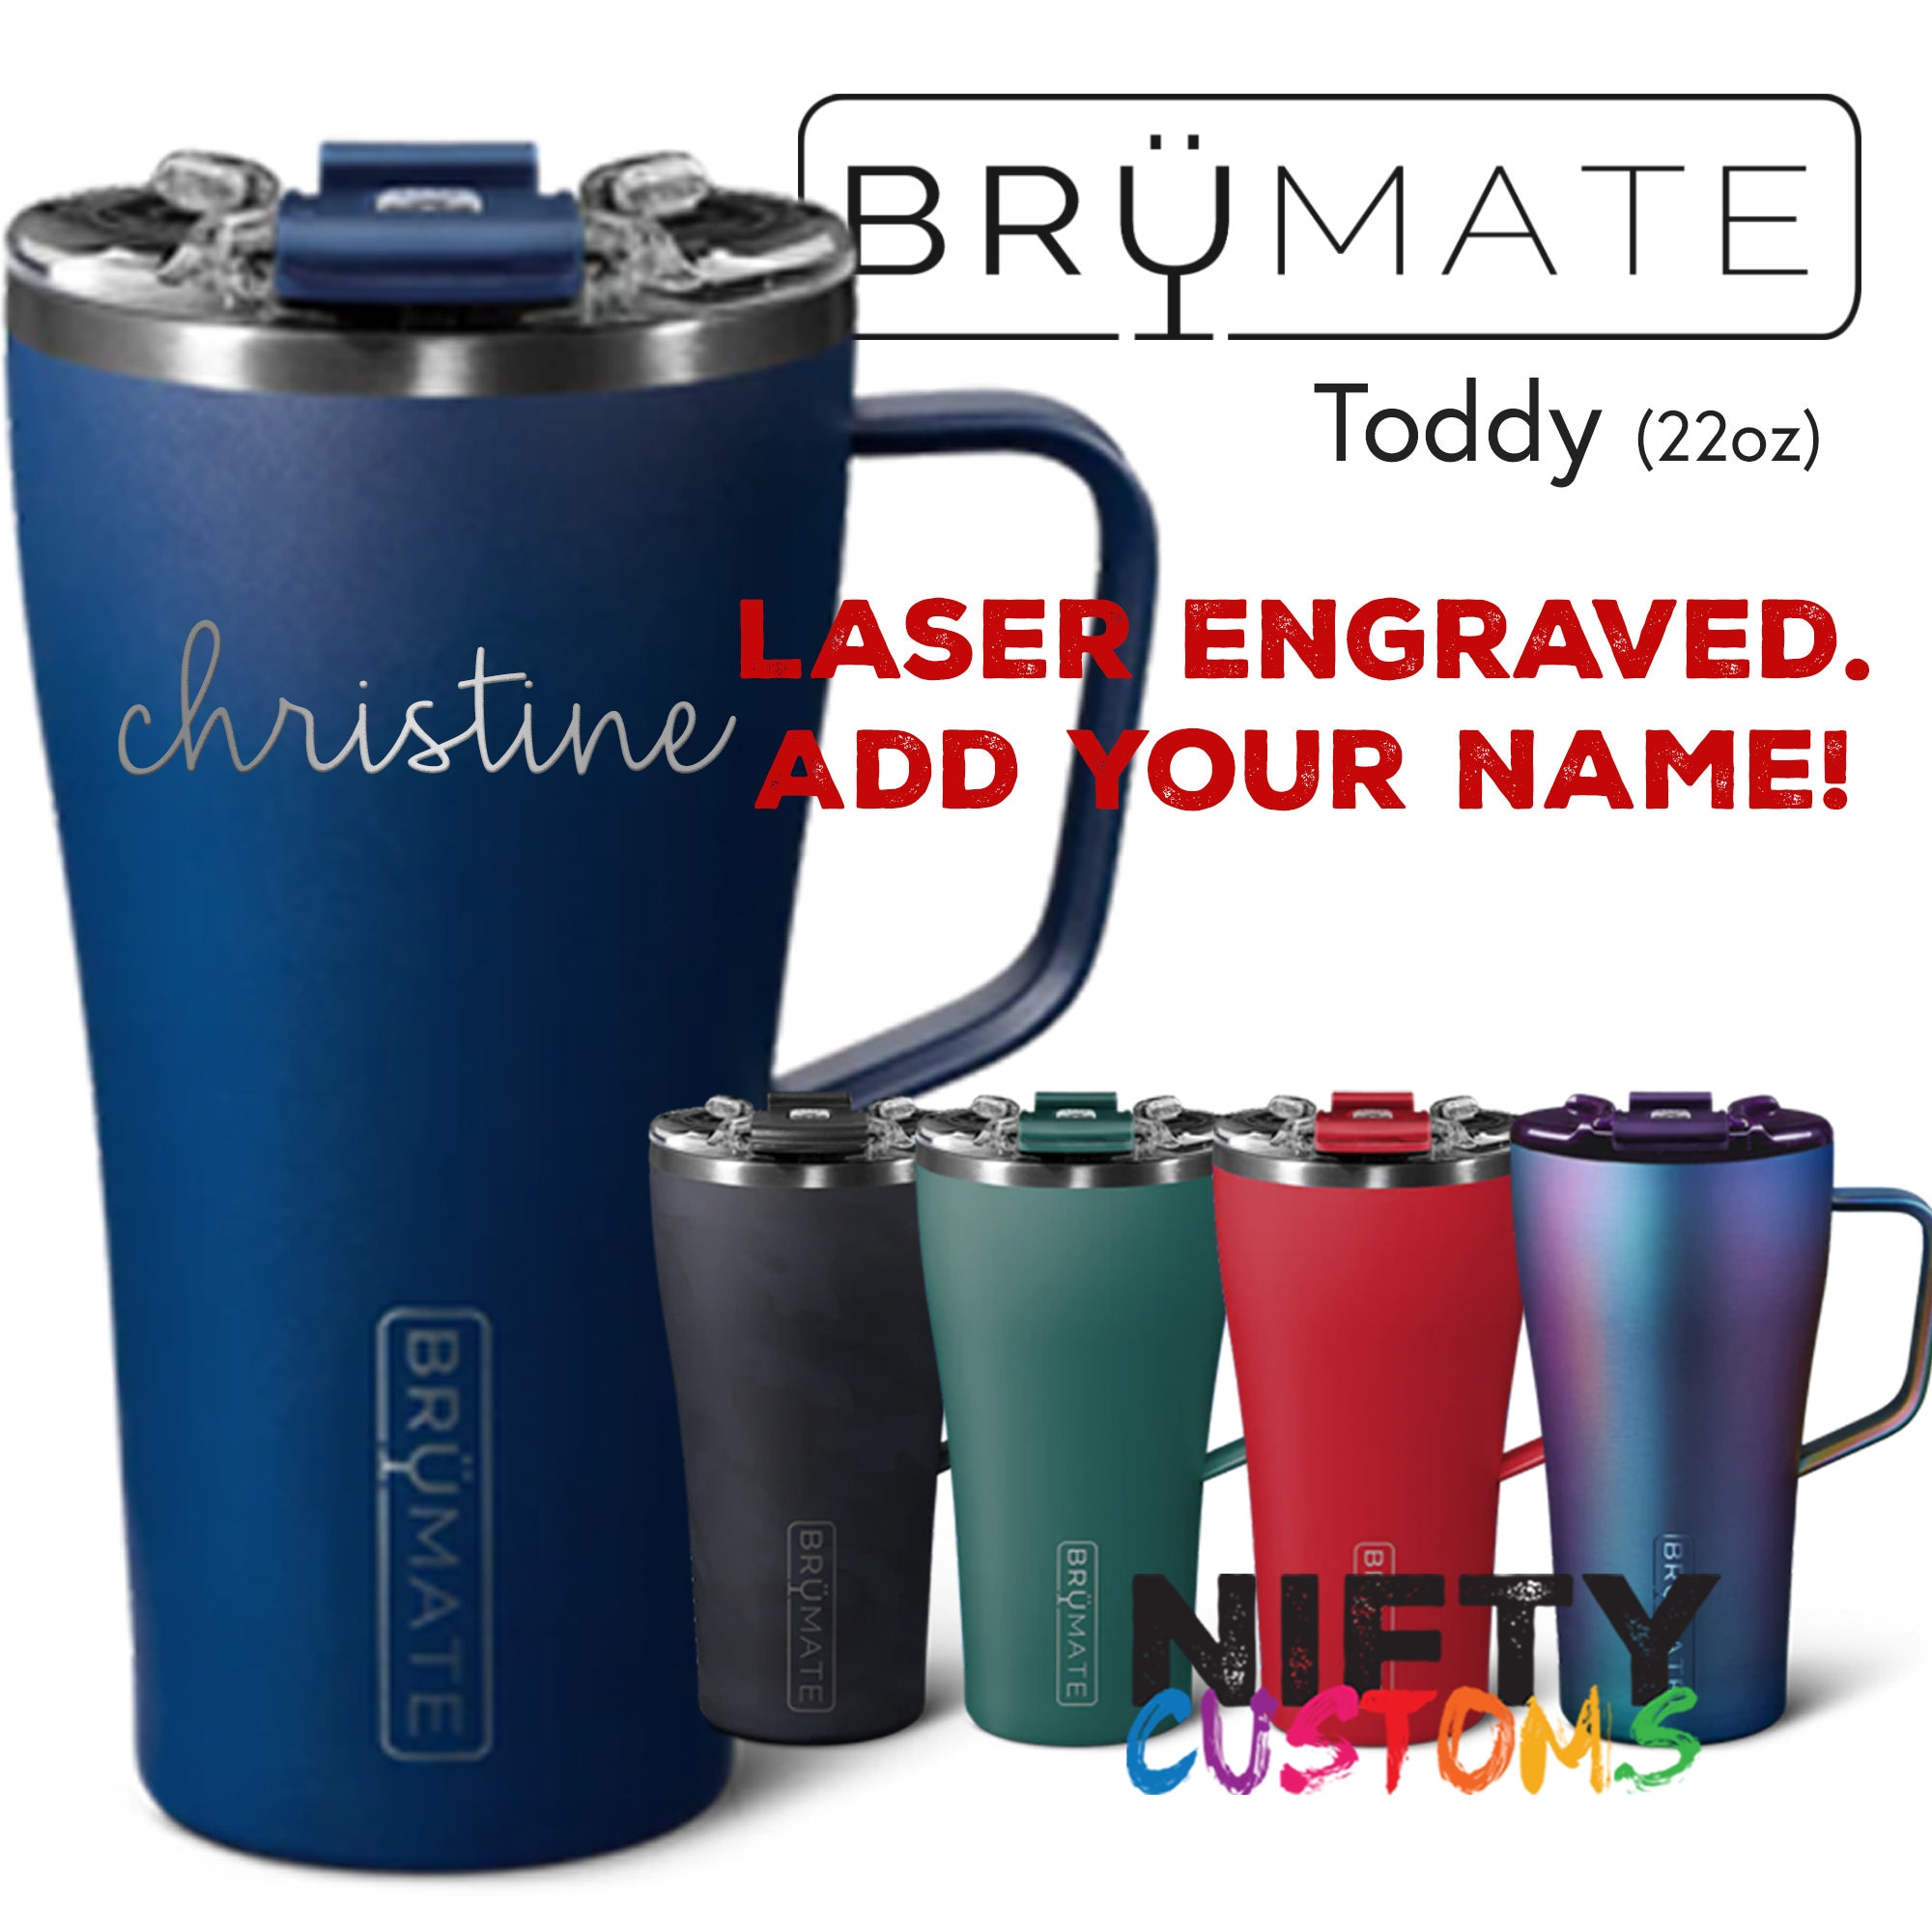 Personalized Brumate Toddy Brümate Coffee Cup 22oz Mug Insulated Stainless  Steel FREE Laser Engraving 